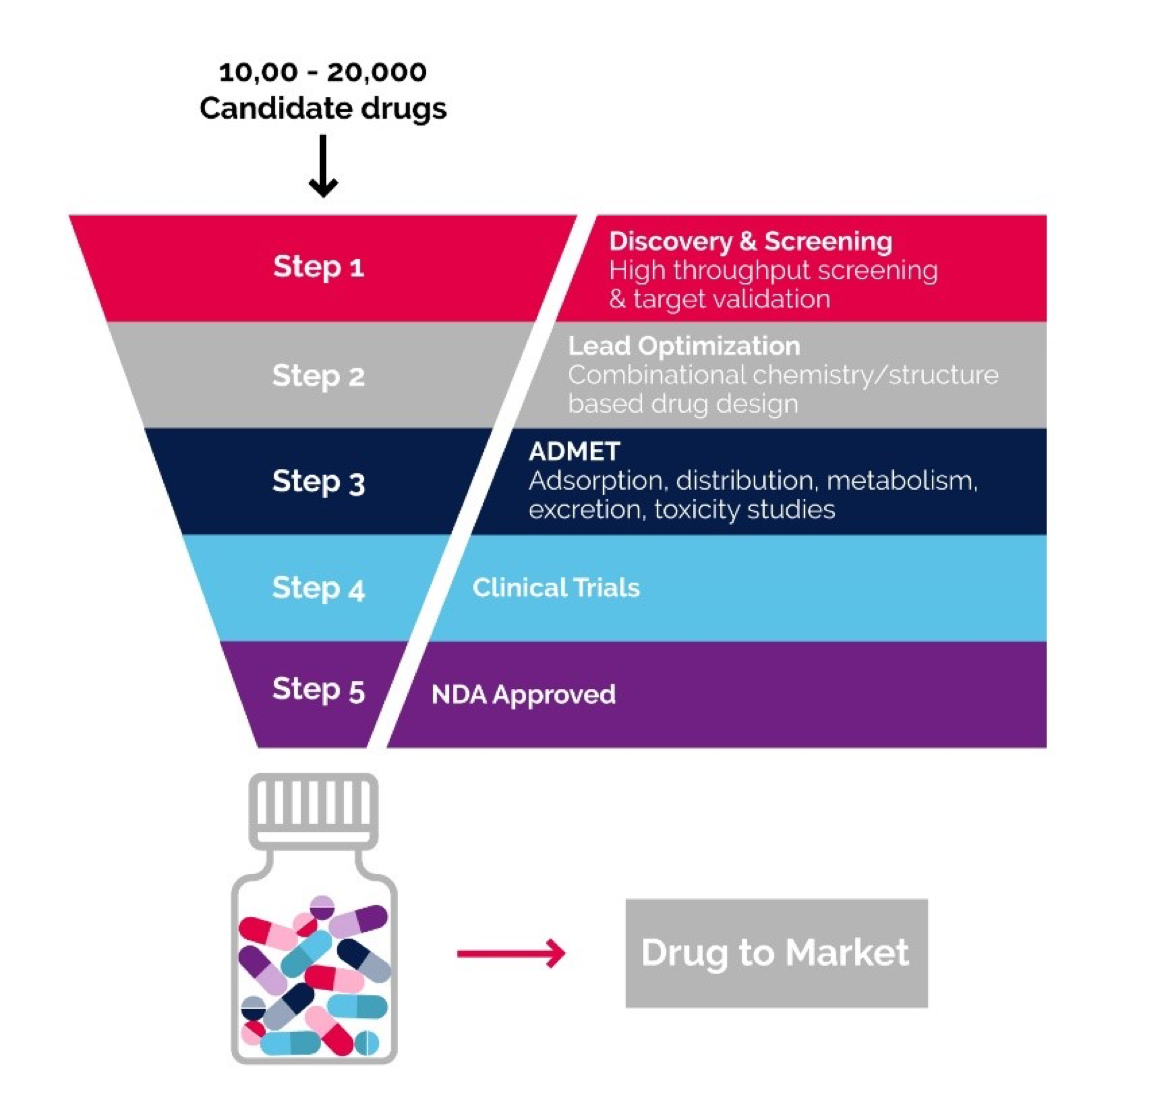 Graphic showing 5 steps of drug production which include: Step 1 – Discovery & Screening, step 2 – Lead optimisation, step 3 Adsorption, distribution, metabolism, excretion, toxicity studies; step 4 – clinical trials; step 5 NDA approval